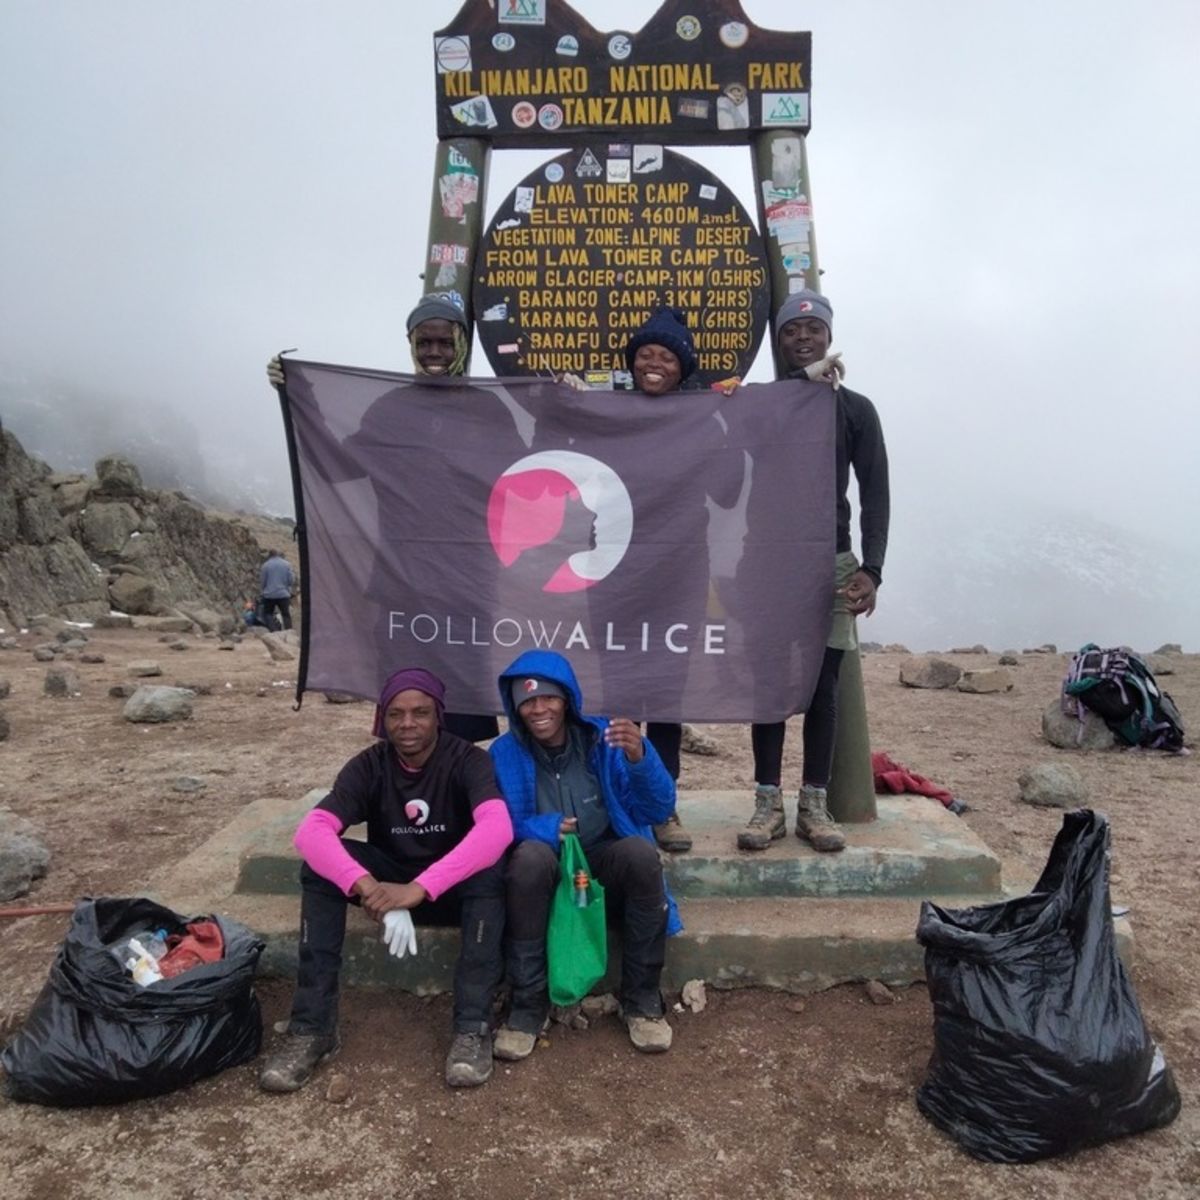 Group of men and women holding Follow Alice flag on Mt Kilimanjaro with full rubbish bags